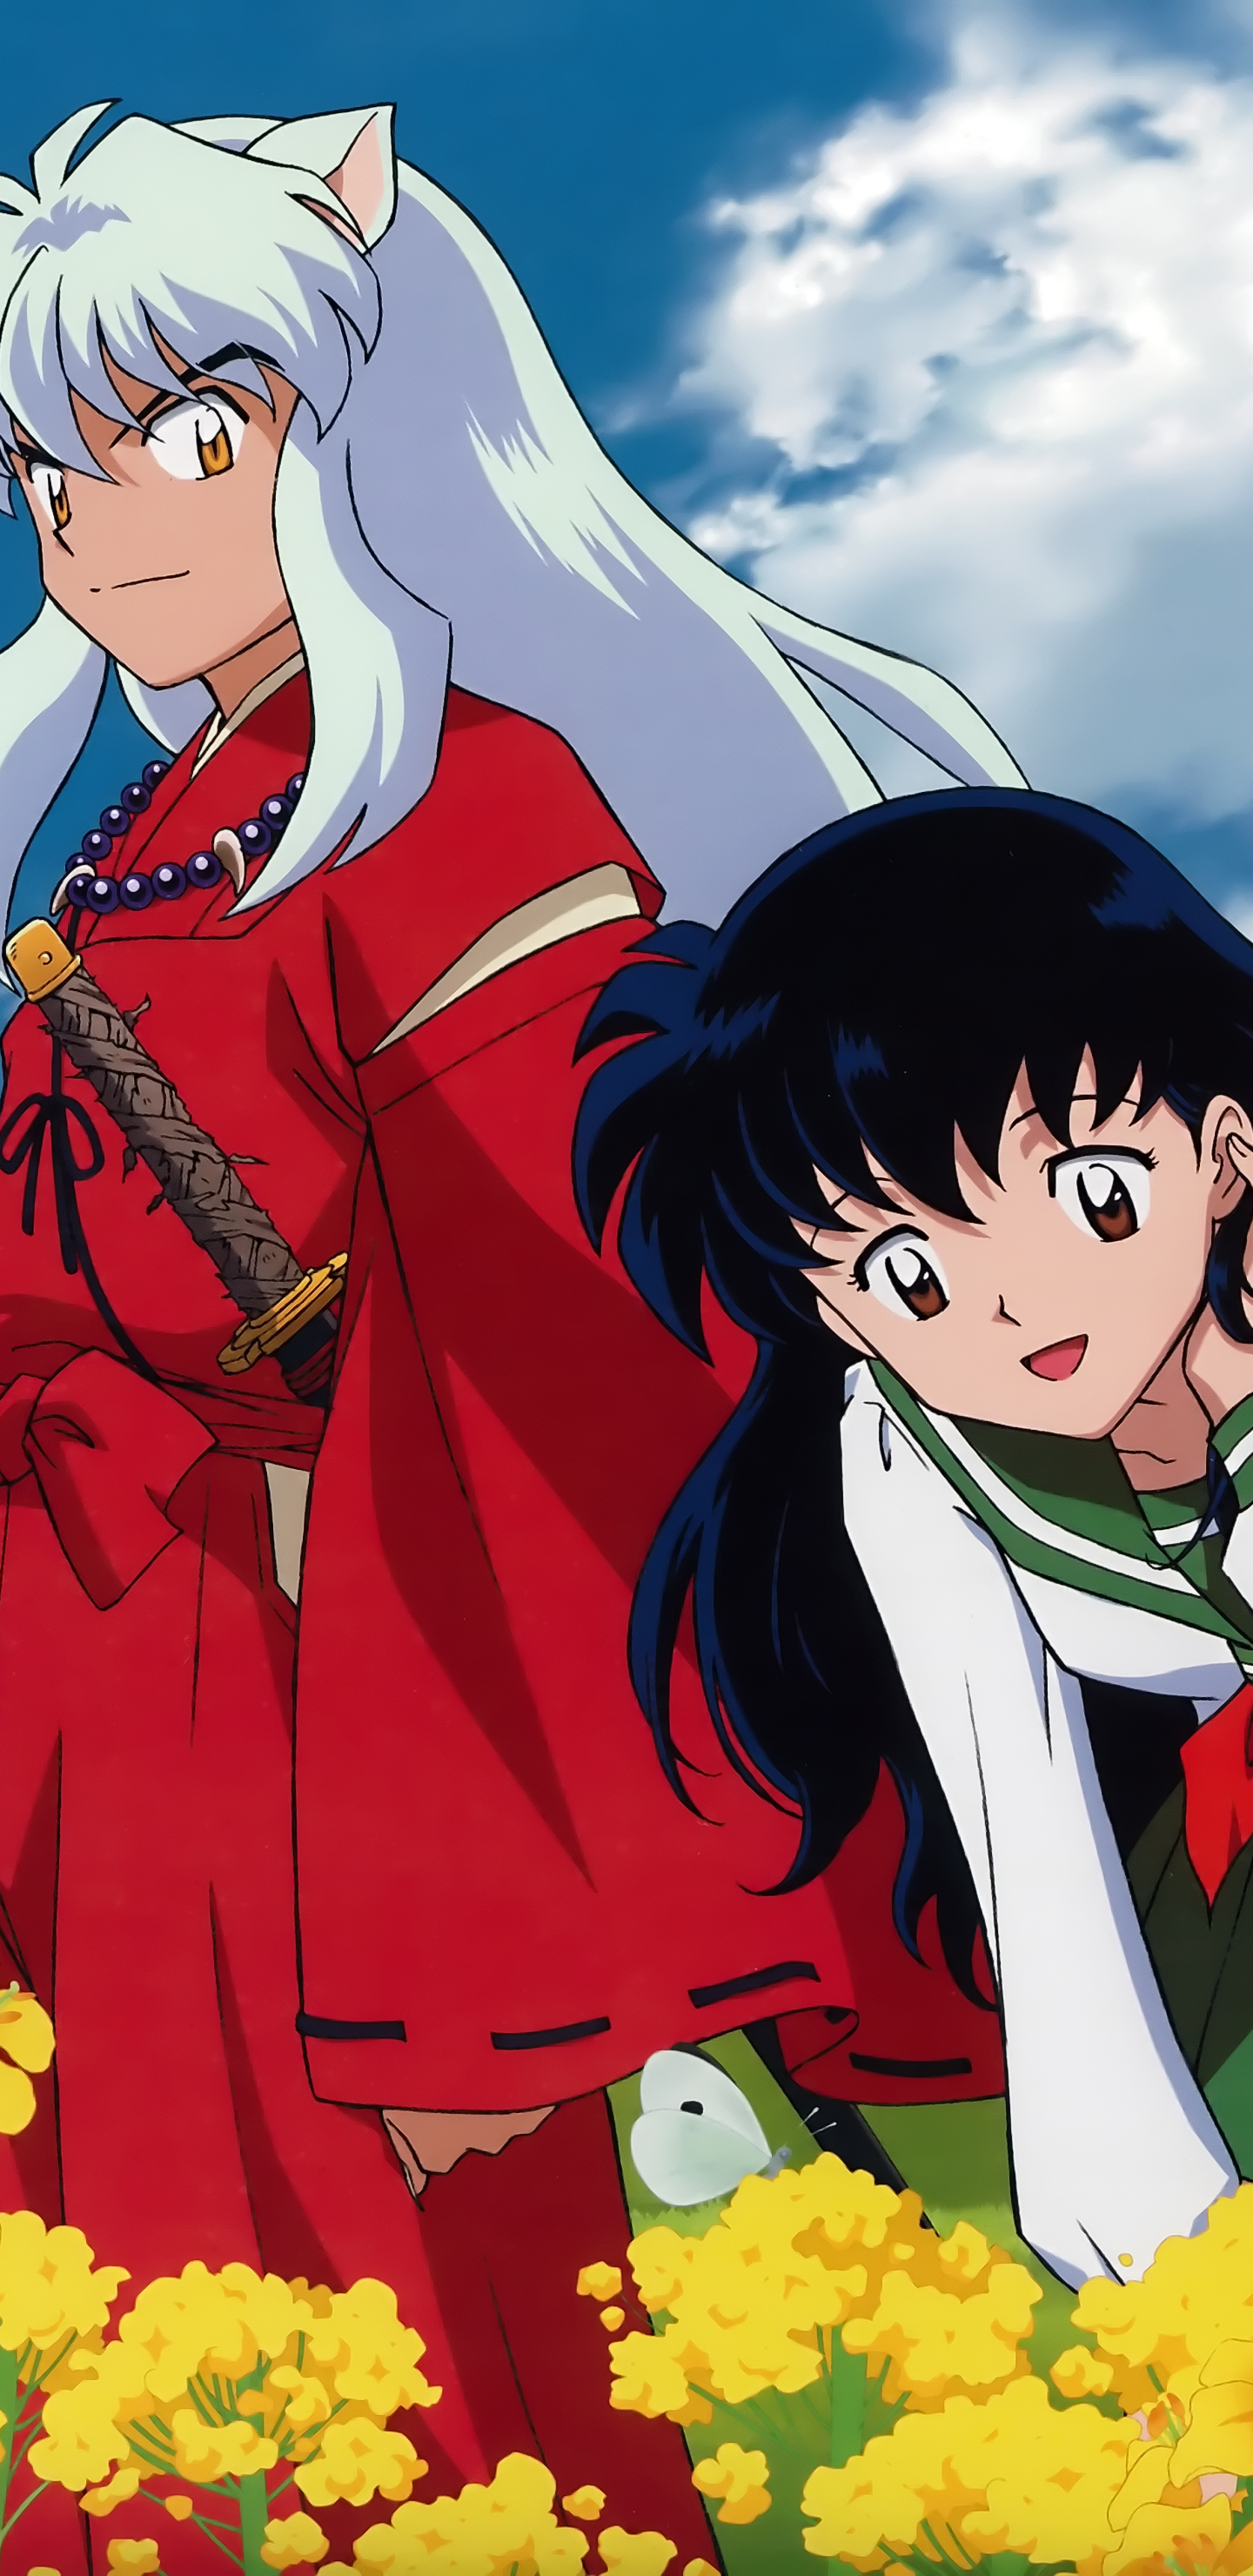 Mobile wallpaper Anime Inuyasha Inuyasha Character 1294975 download  the picture for free